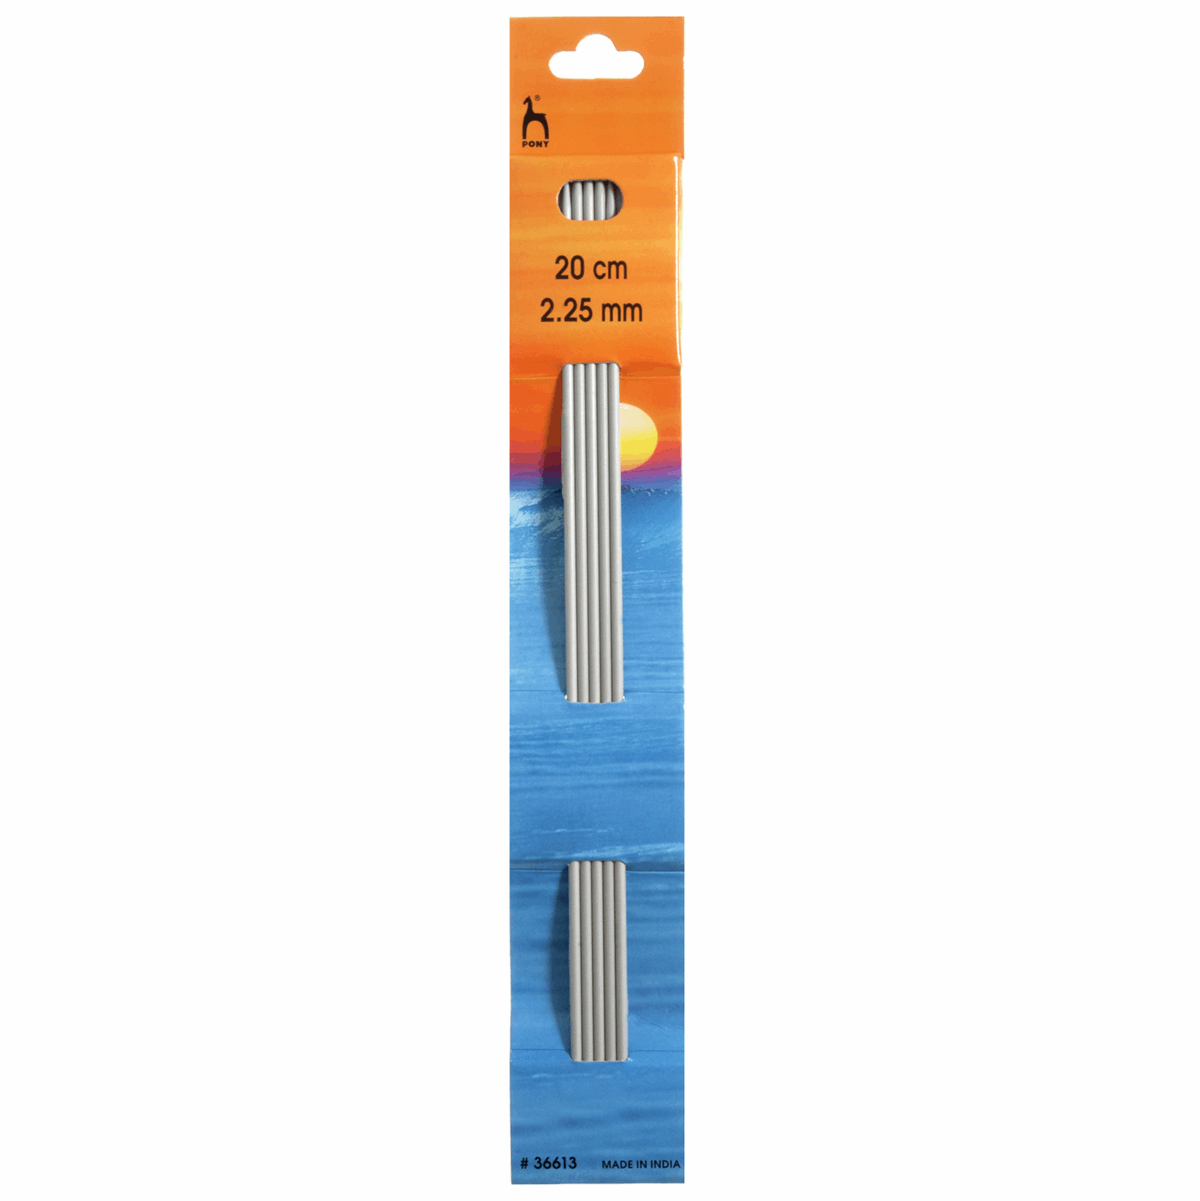 PONY Double-Ended Knitting Pins - 20cm x 2.25mm (Set of 5)